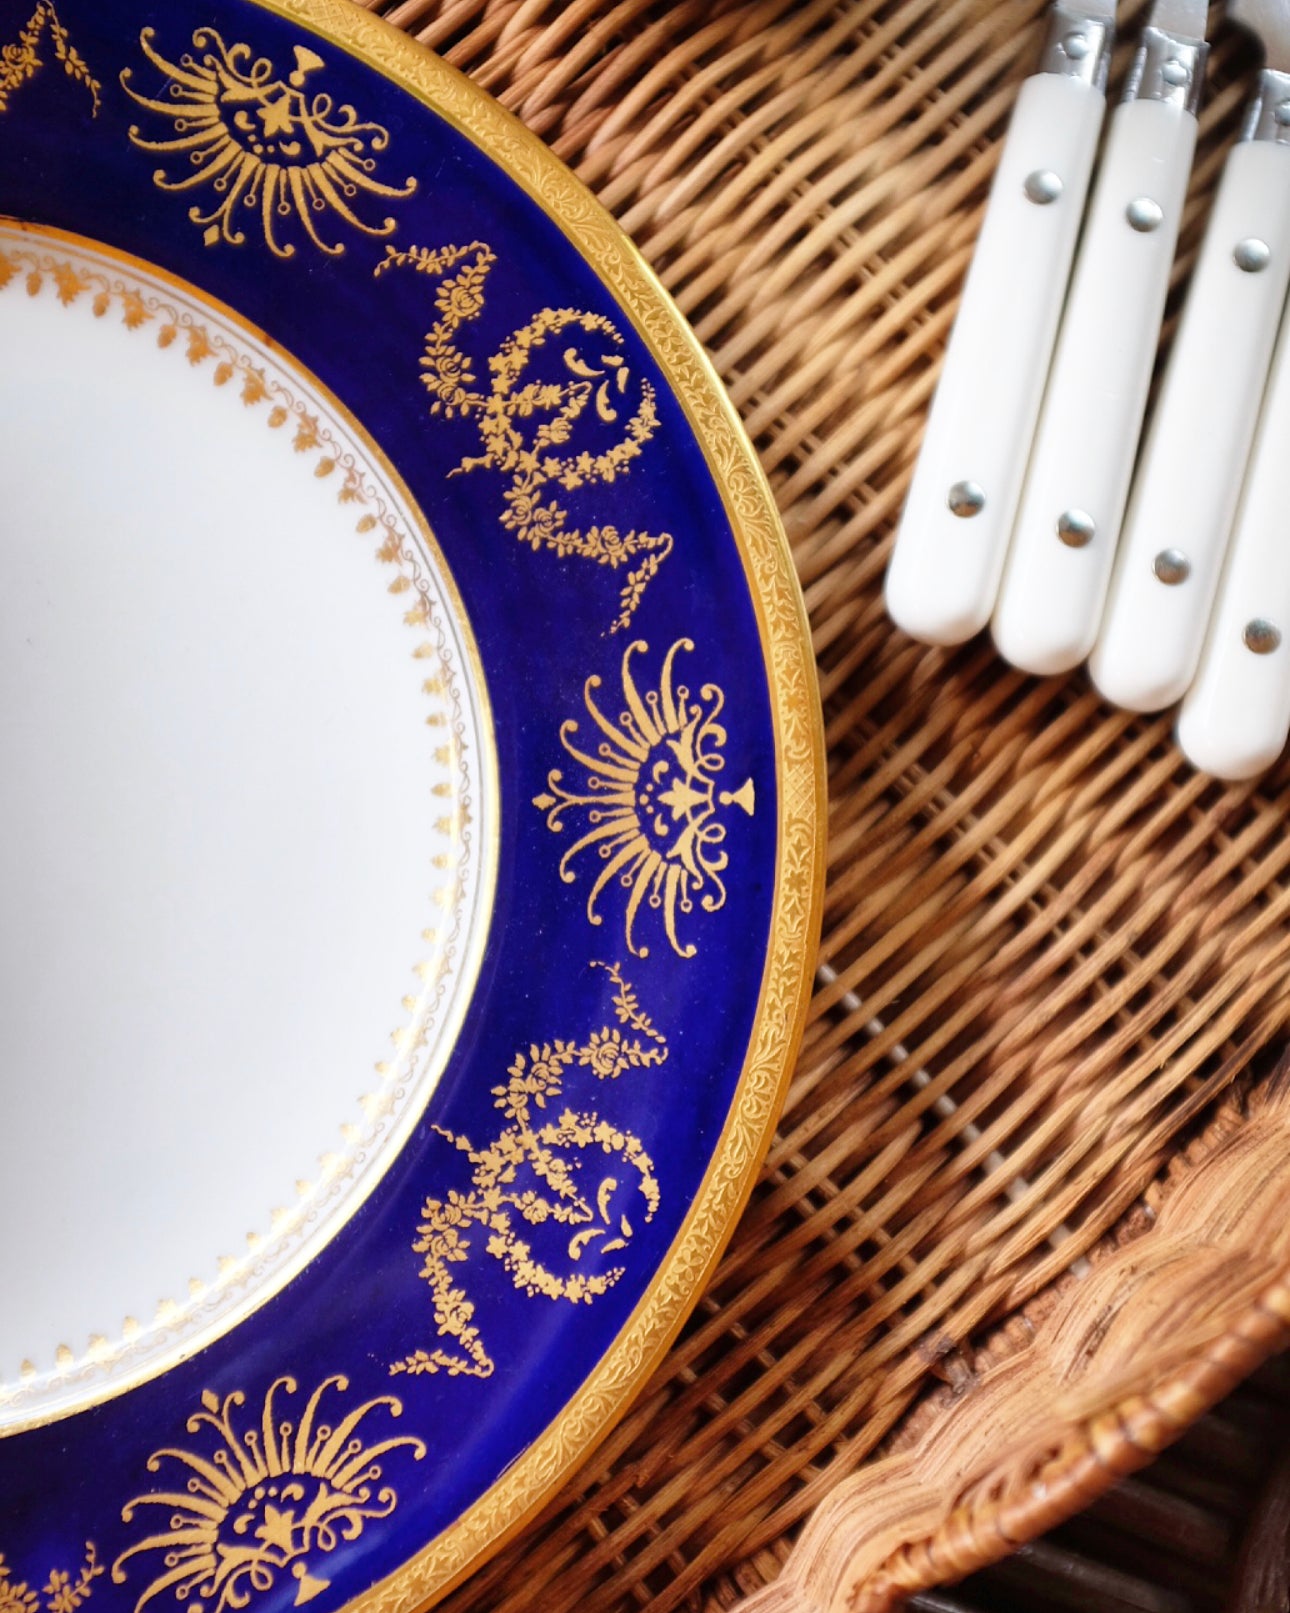 China Plate with Navy and Gold Trim